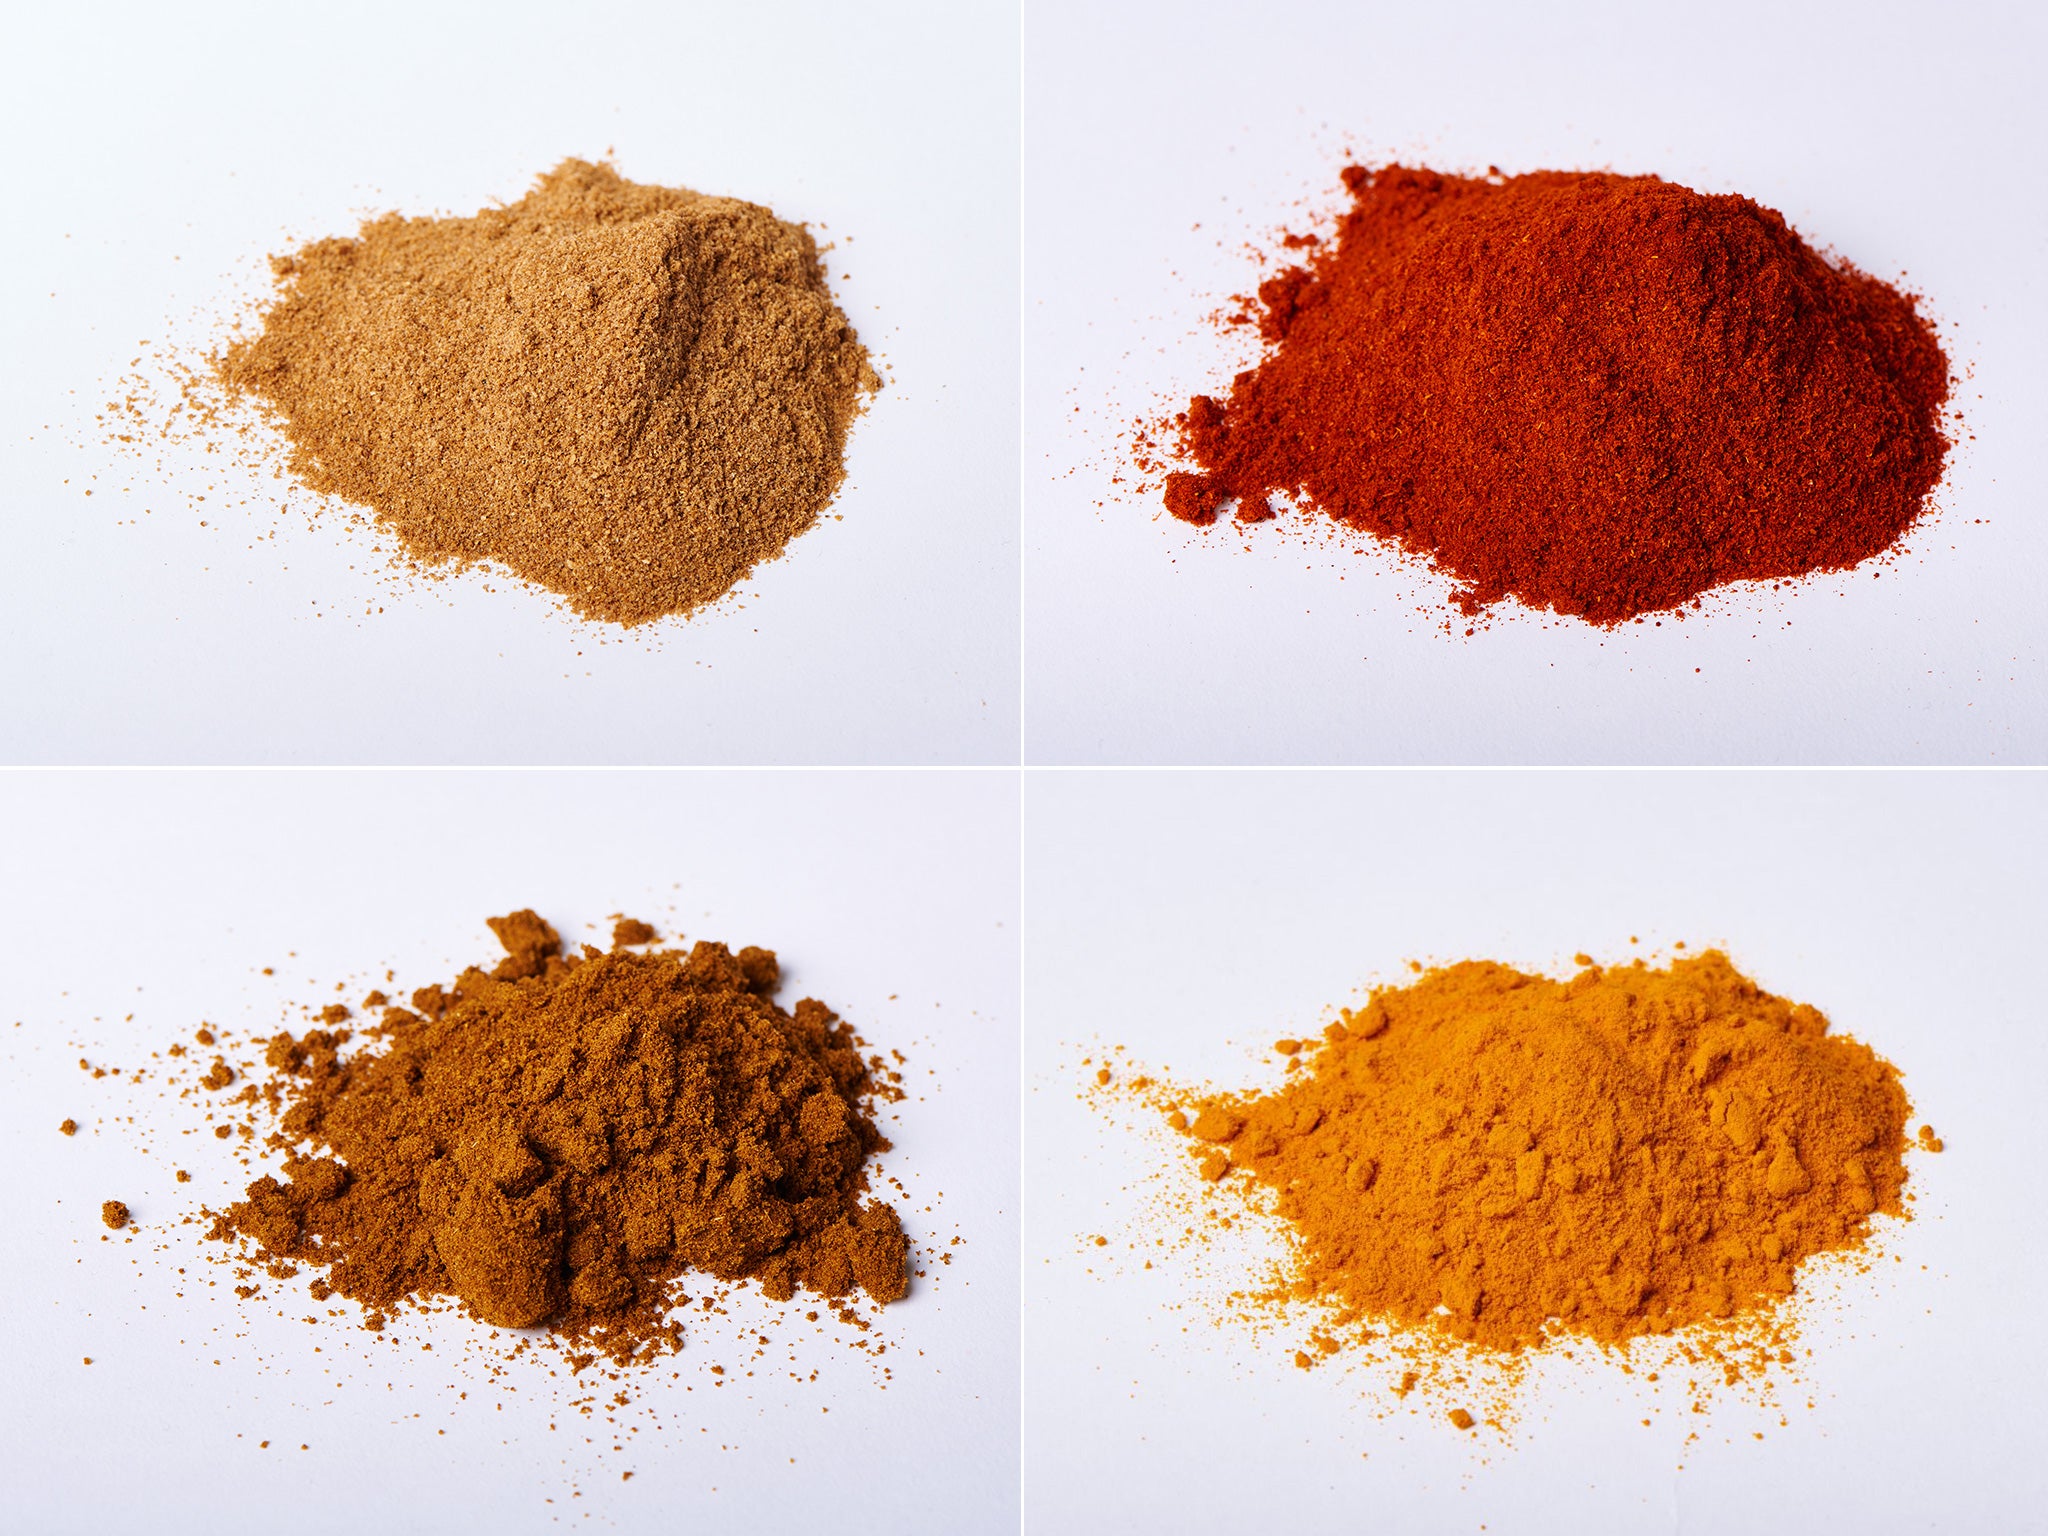 There is no shortage of middle men in the spice industry